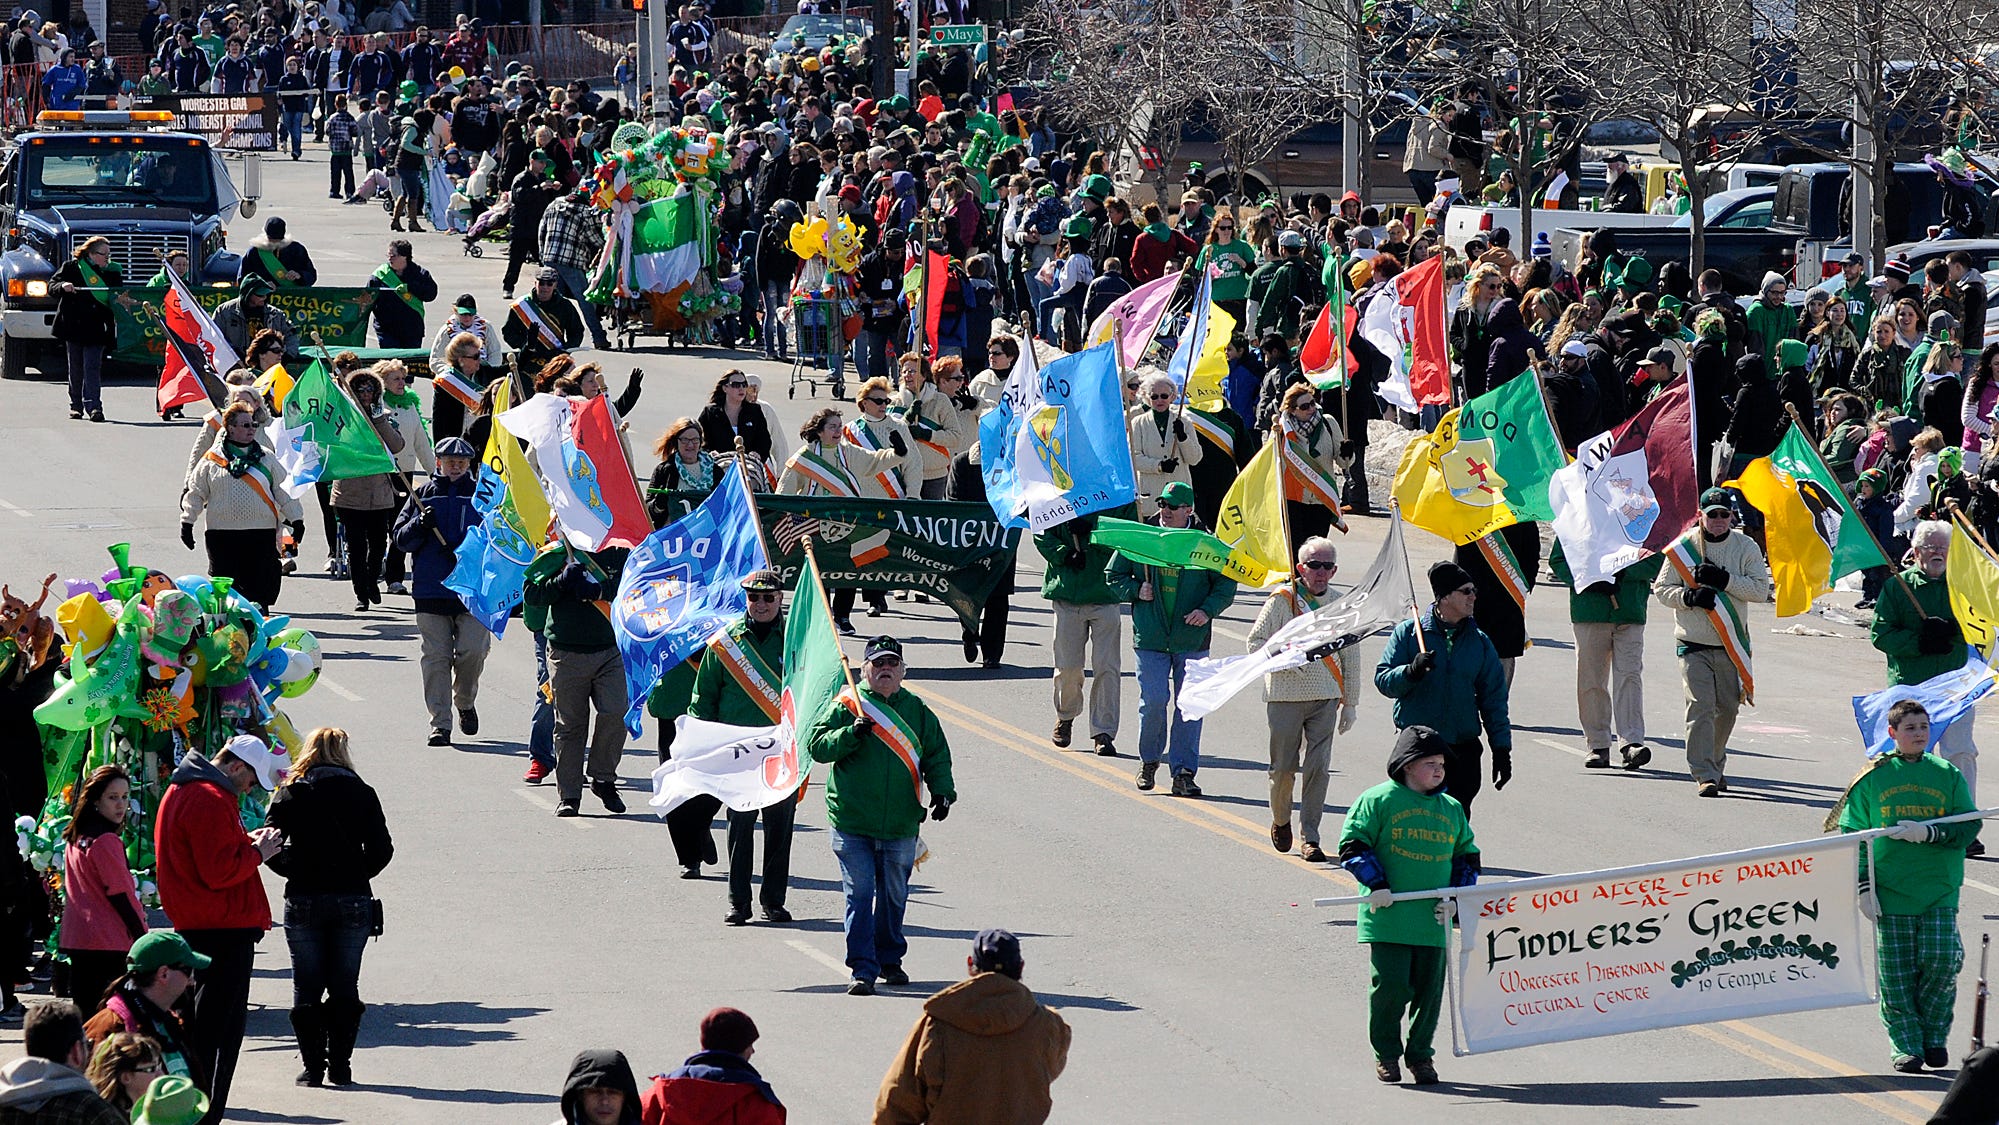 March on! Worcester County St. Patrick's Parade returns Sunday. What